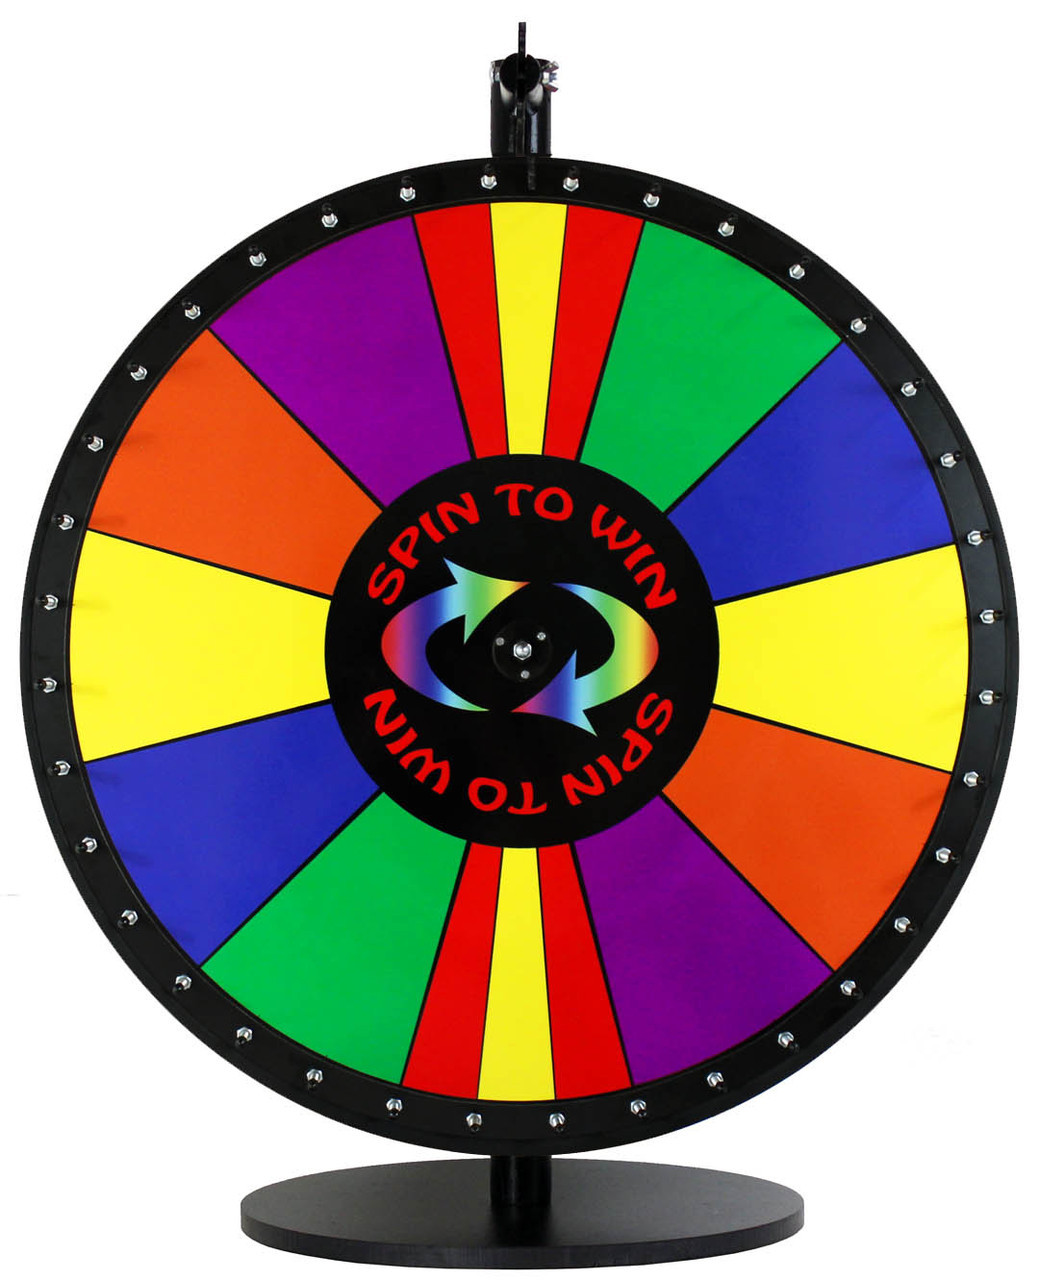 spin the wheel to win real money